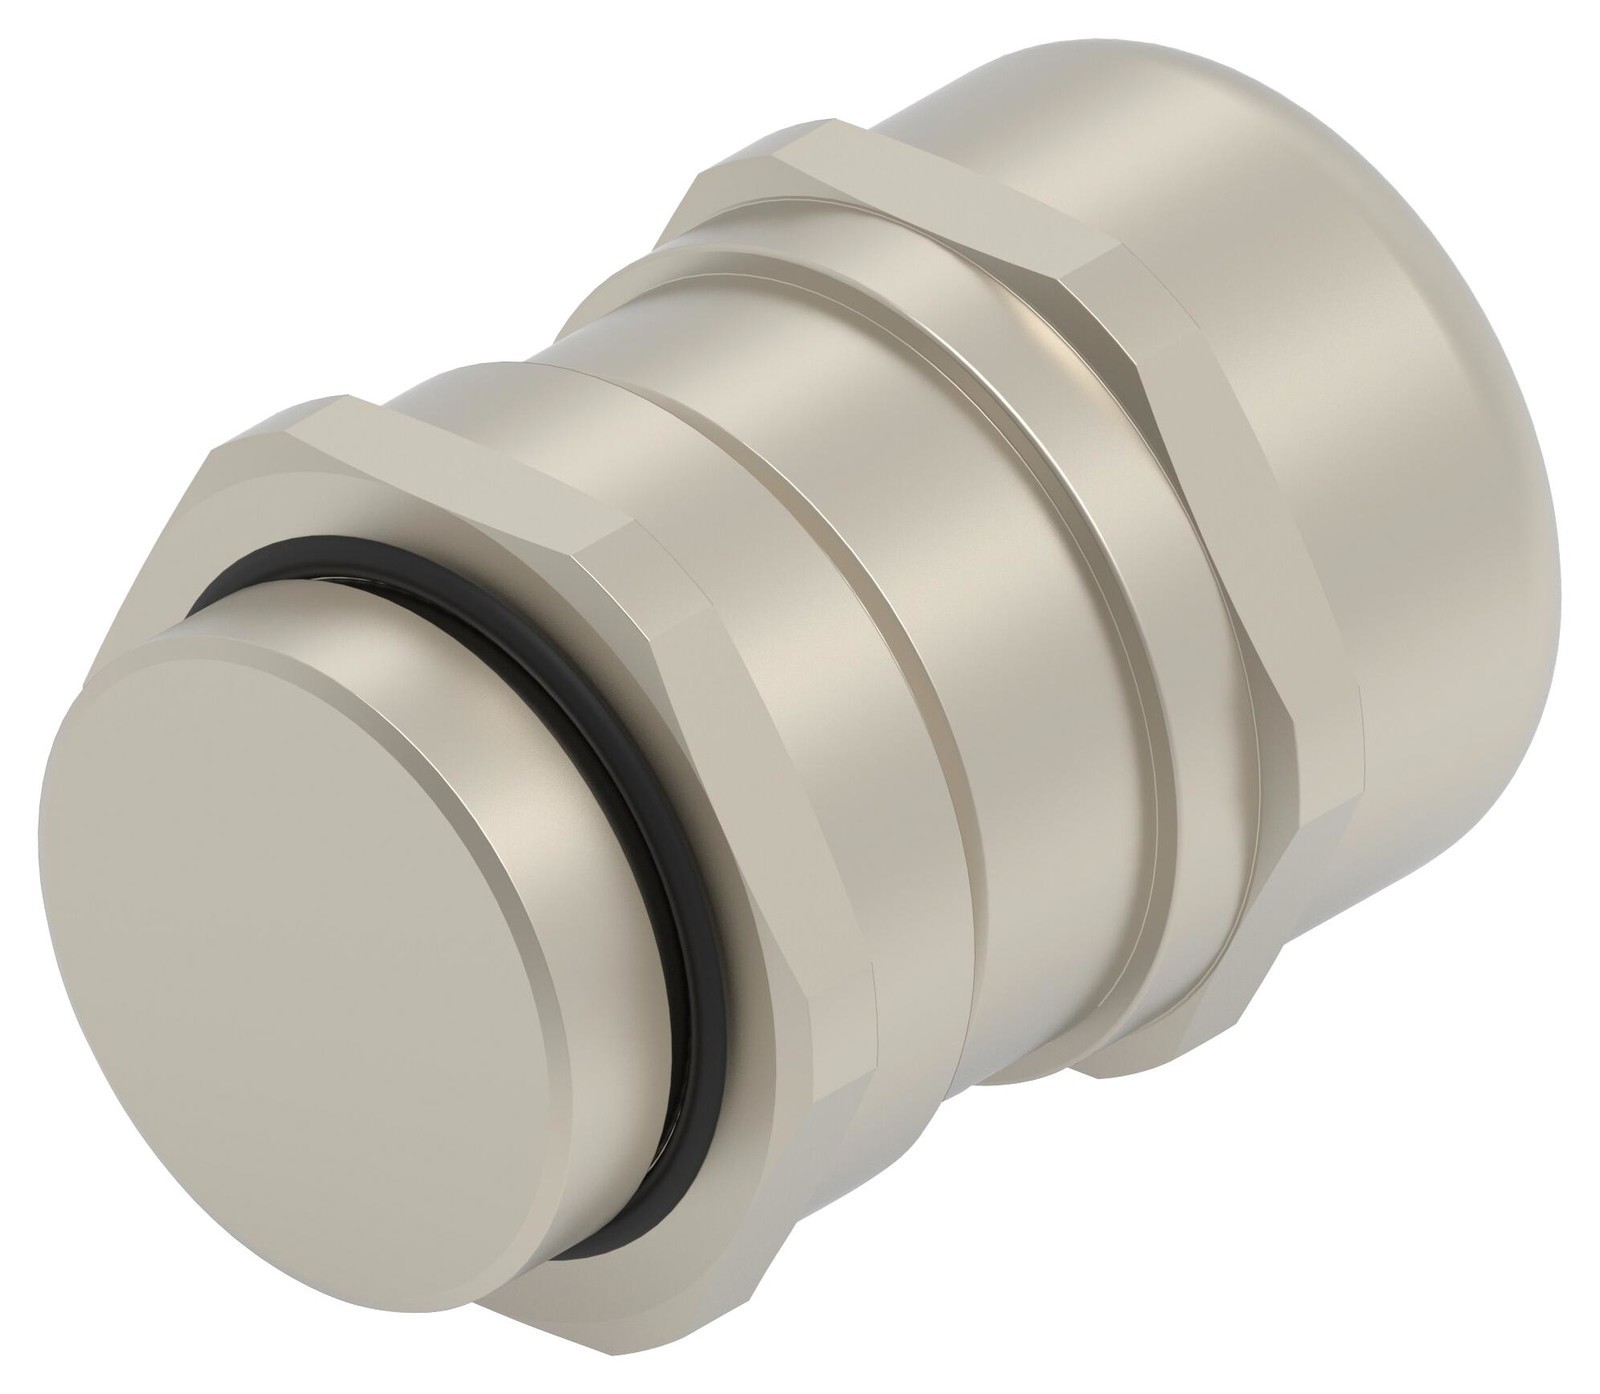 Entrelec TE Connectivity 1Sng614006R0000 Cable Gland, Brass, 20mm, M32X1.5